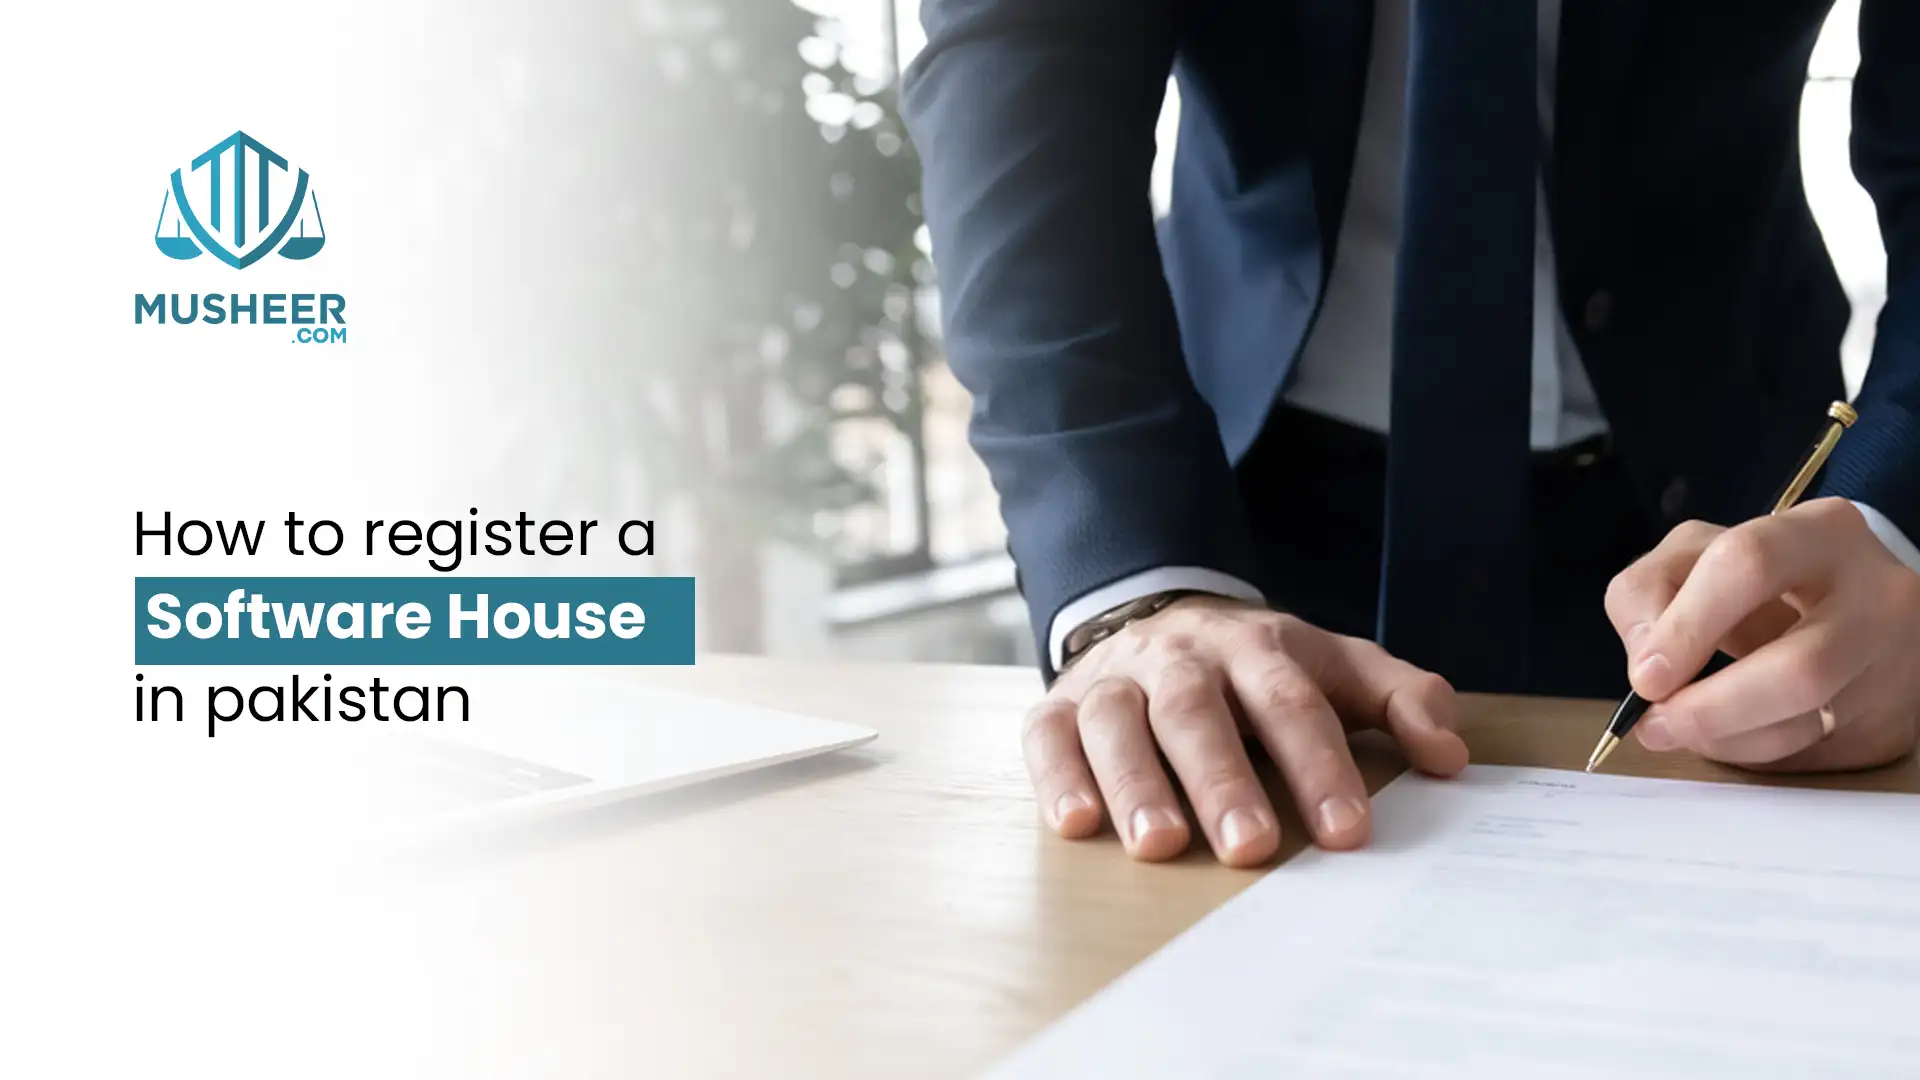 How to register a Software House in Pakistan